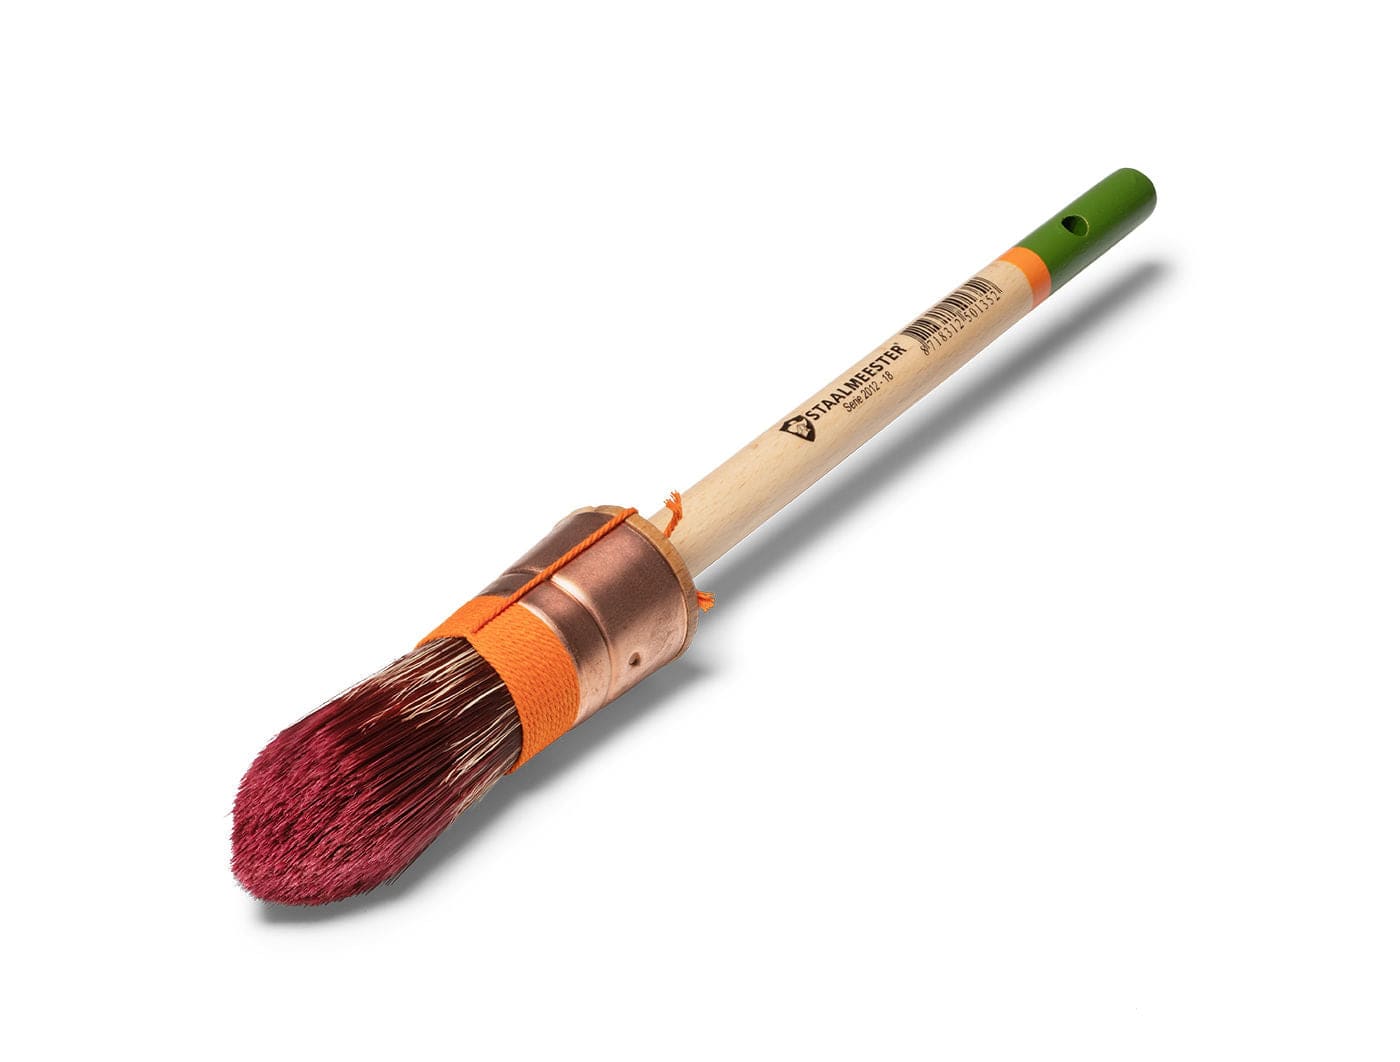 Fusion Paint Brushes Staalmeester Pro-Hybrid Series Pointed Sash Brush #18